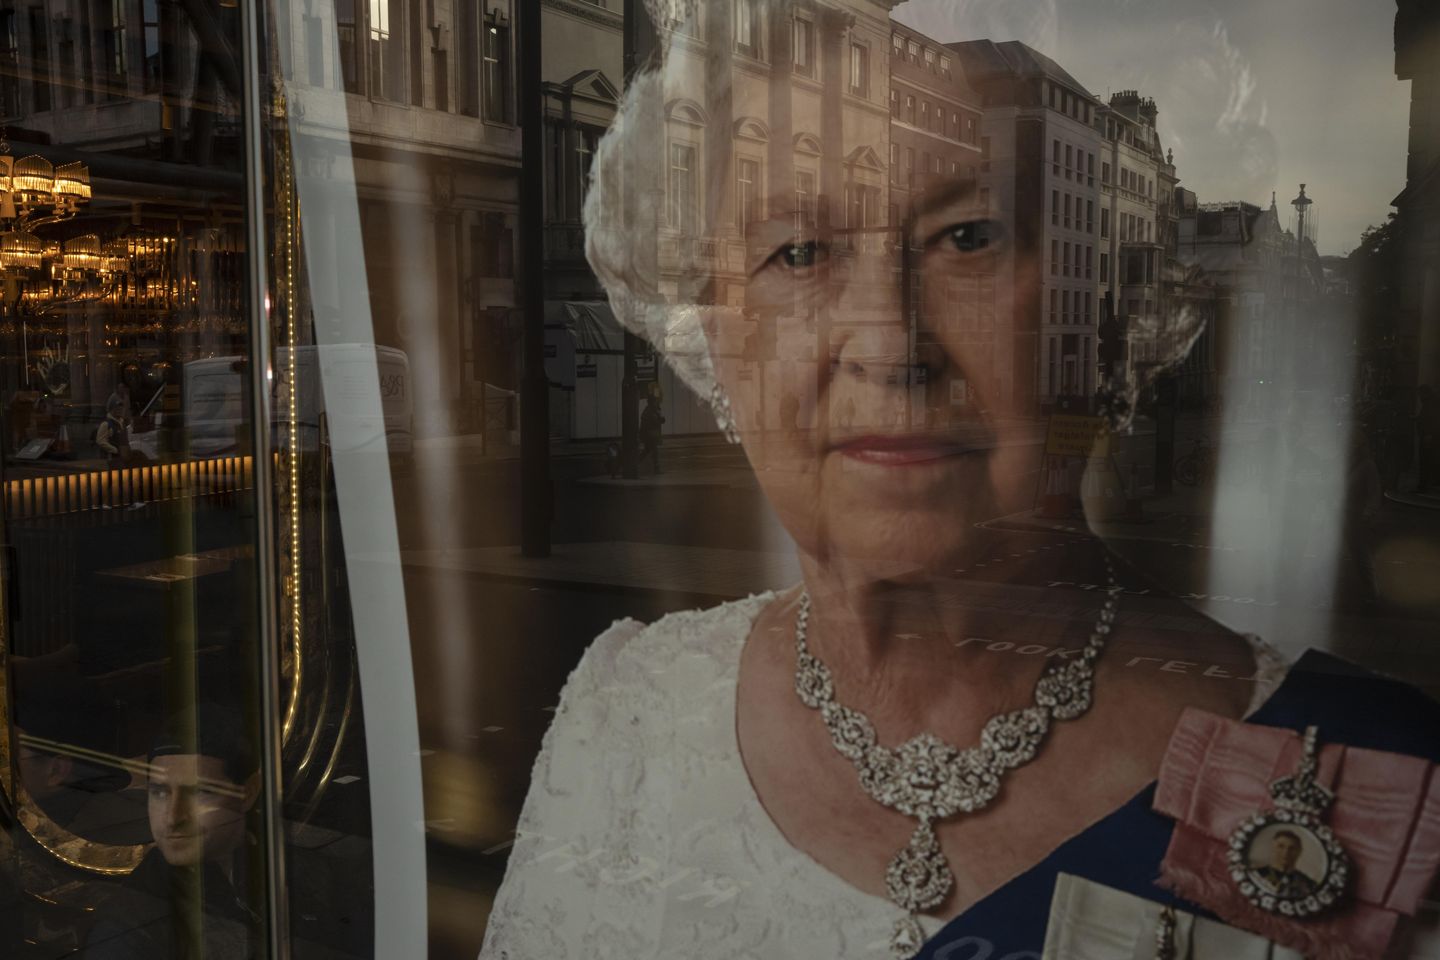 Live updates: Charles' wife pays tribute to the late queen